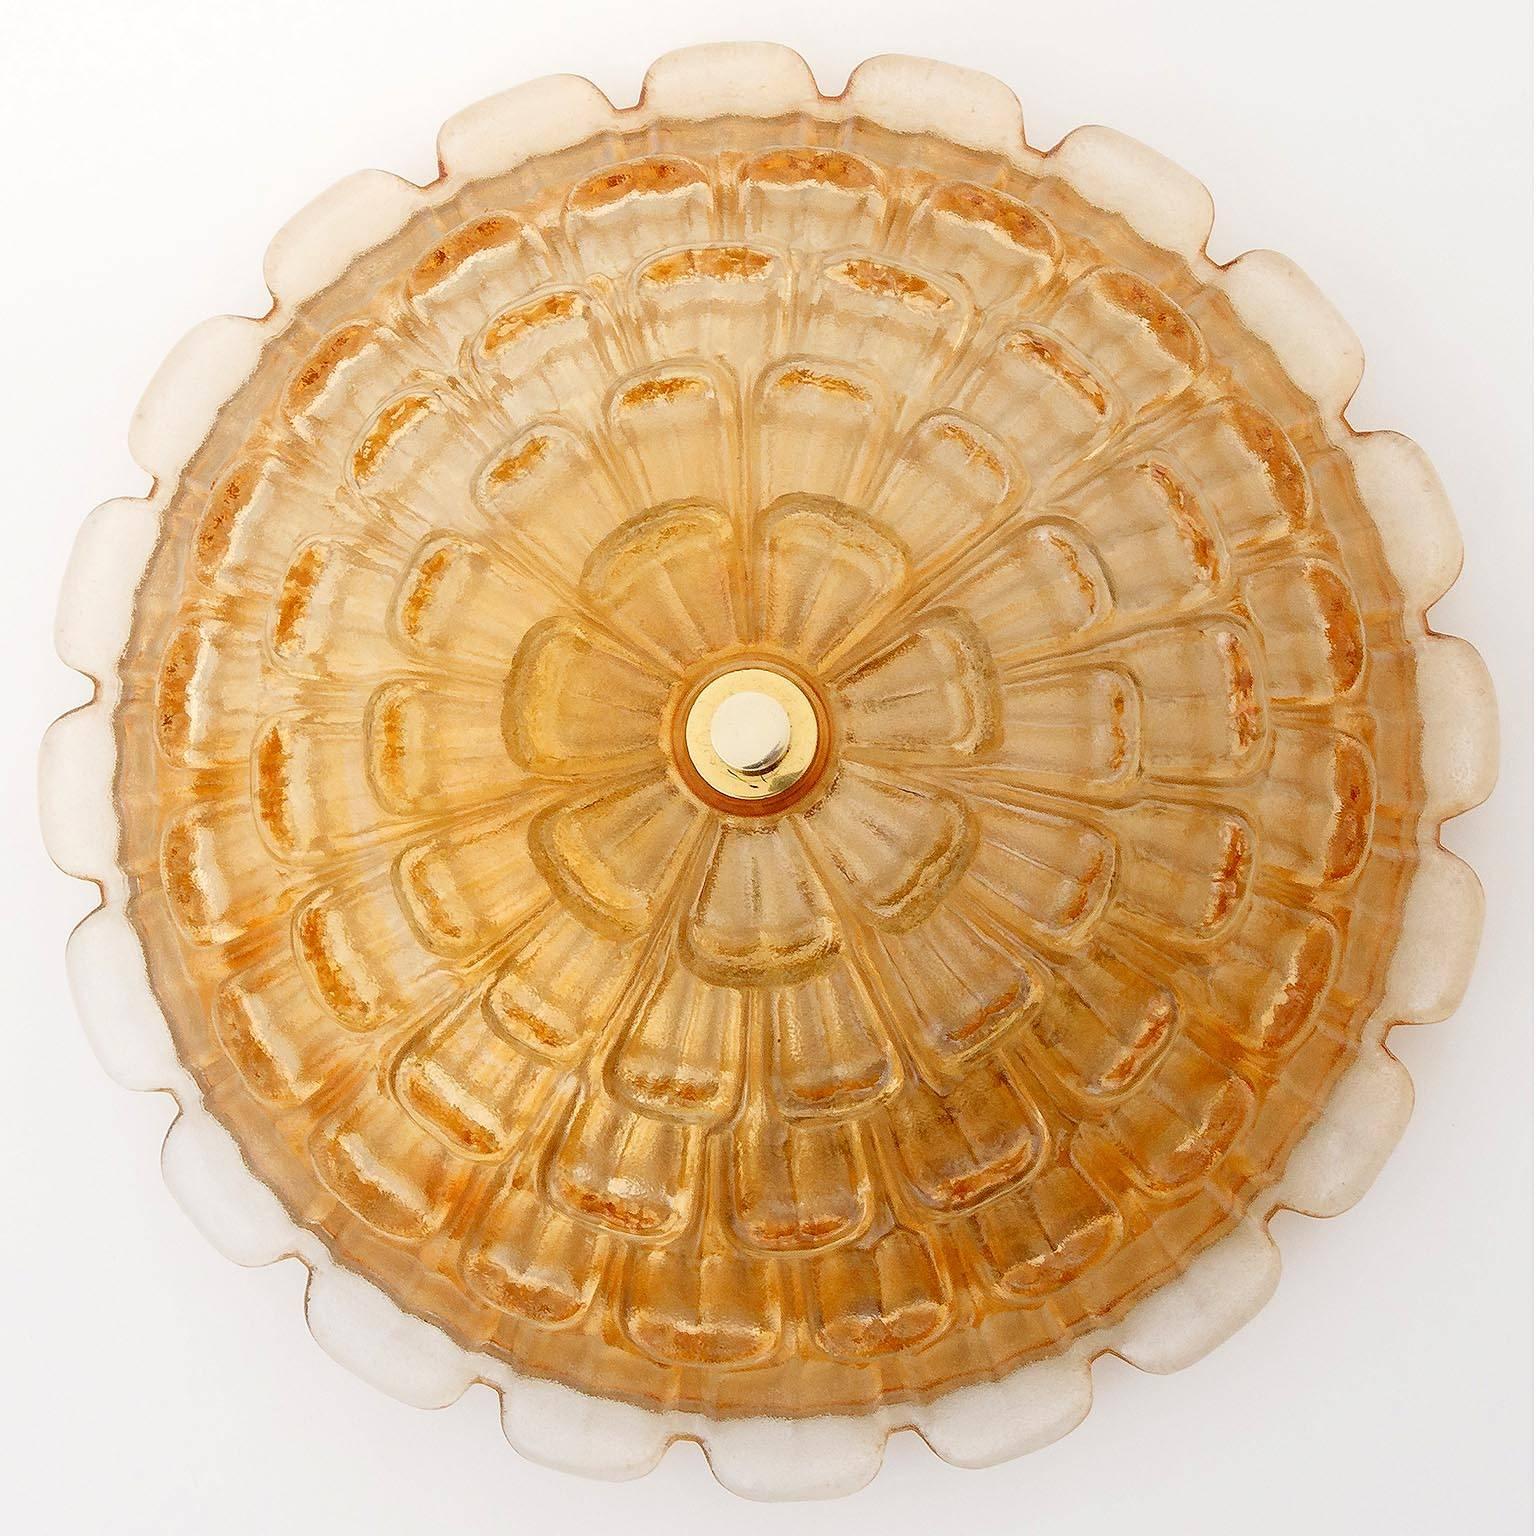 A large and massive floral German ceiling light fixture, manufactured in Mid-Century, circa 1970. 
A textured and amber or orange tone glass is mounted with a brass bolt to an golden painted metal backplate.
The lamp has four sockets for four